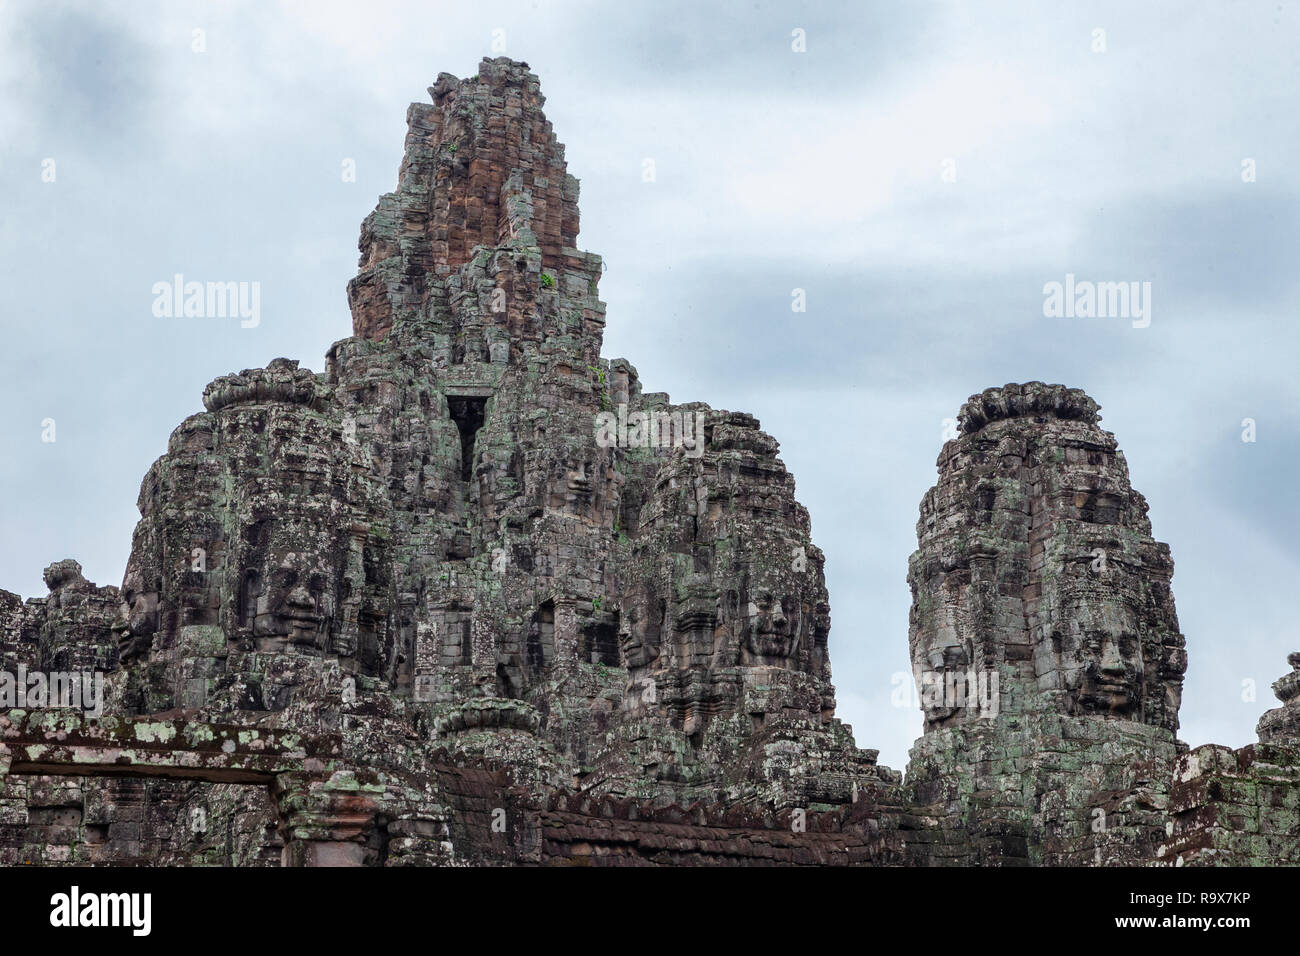 Stone temples with faces in Cambodia Stock Photo